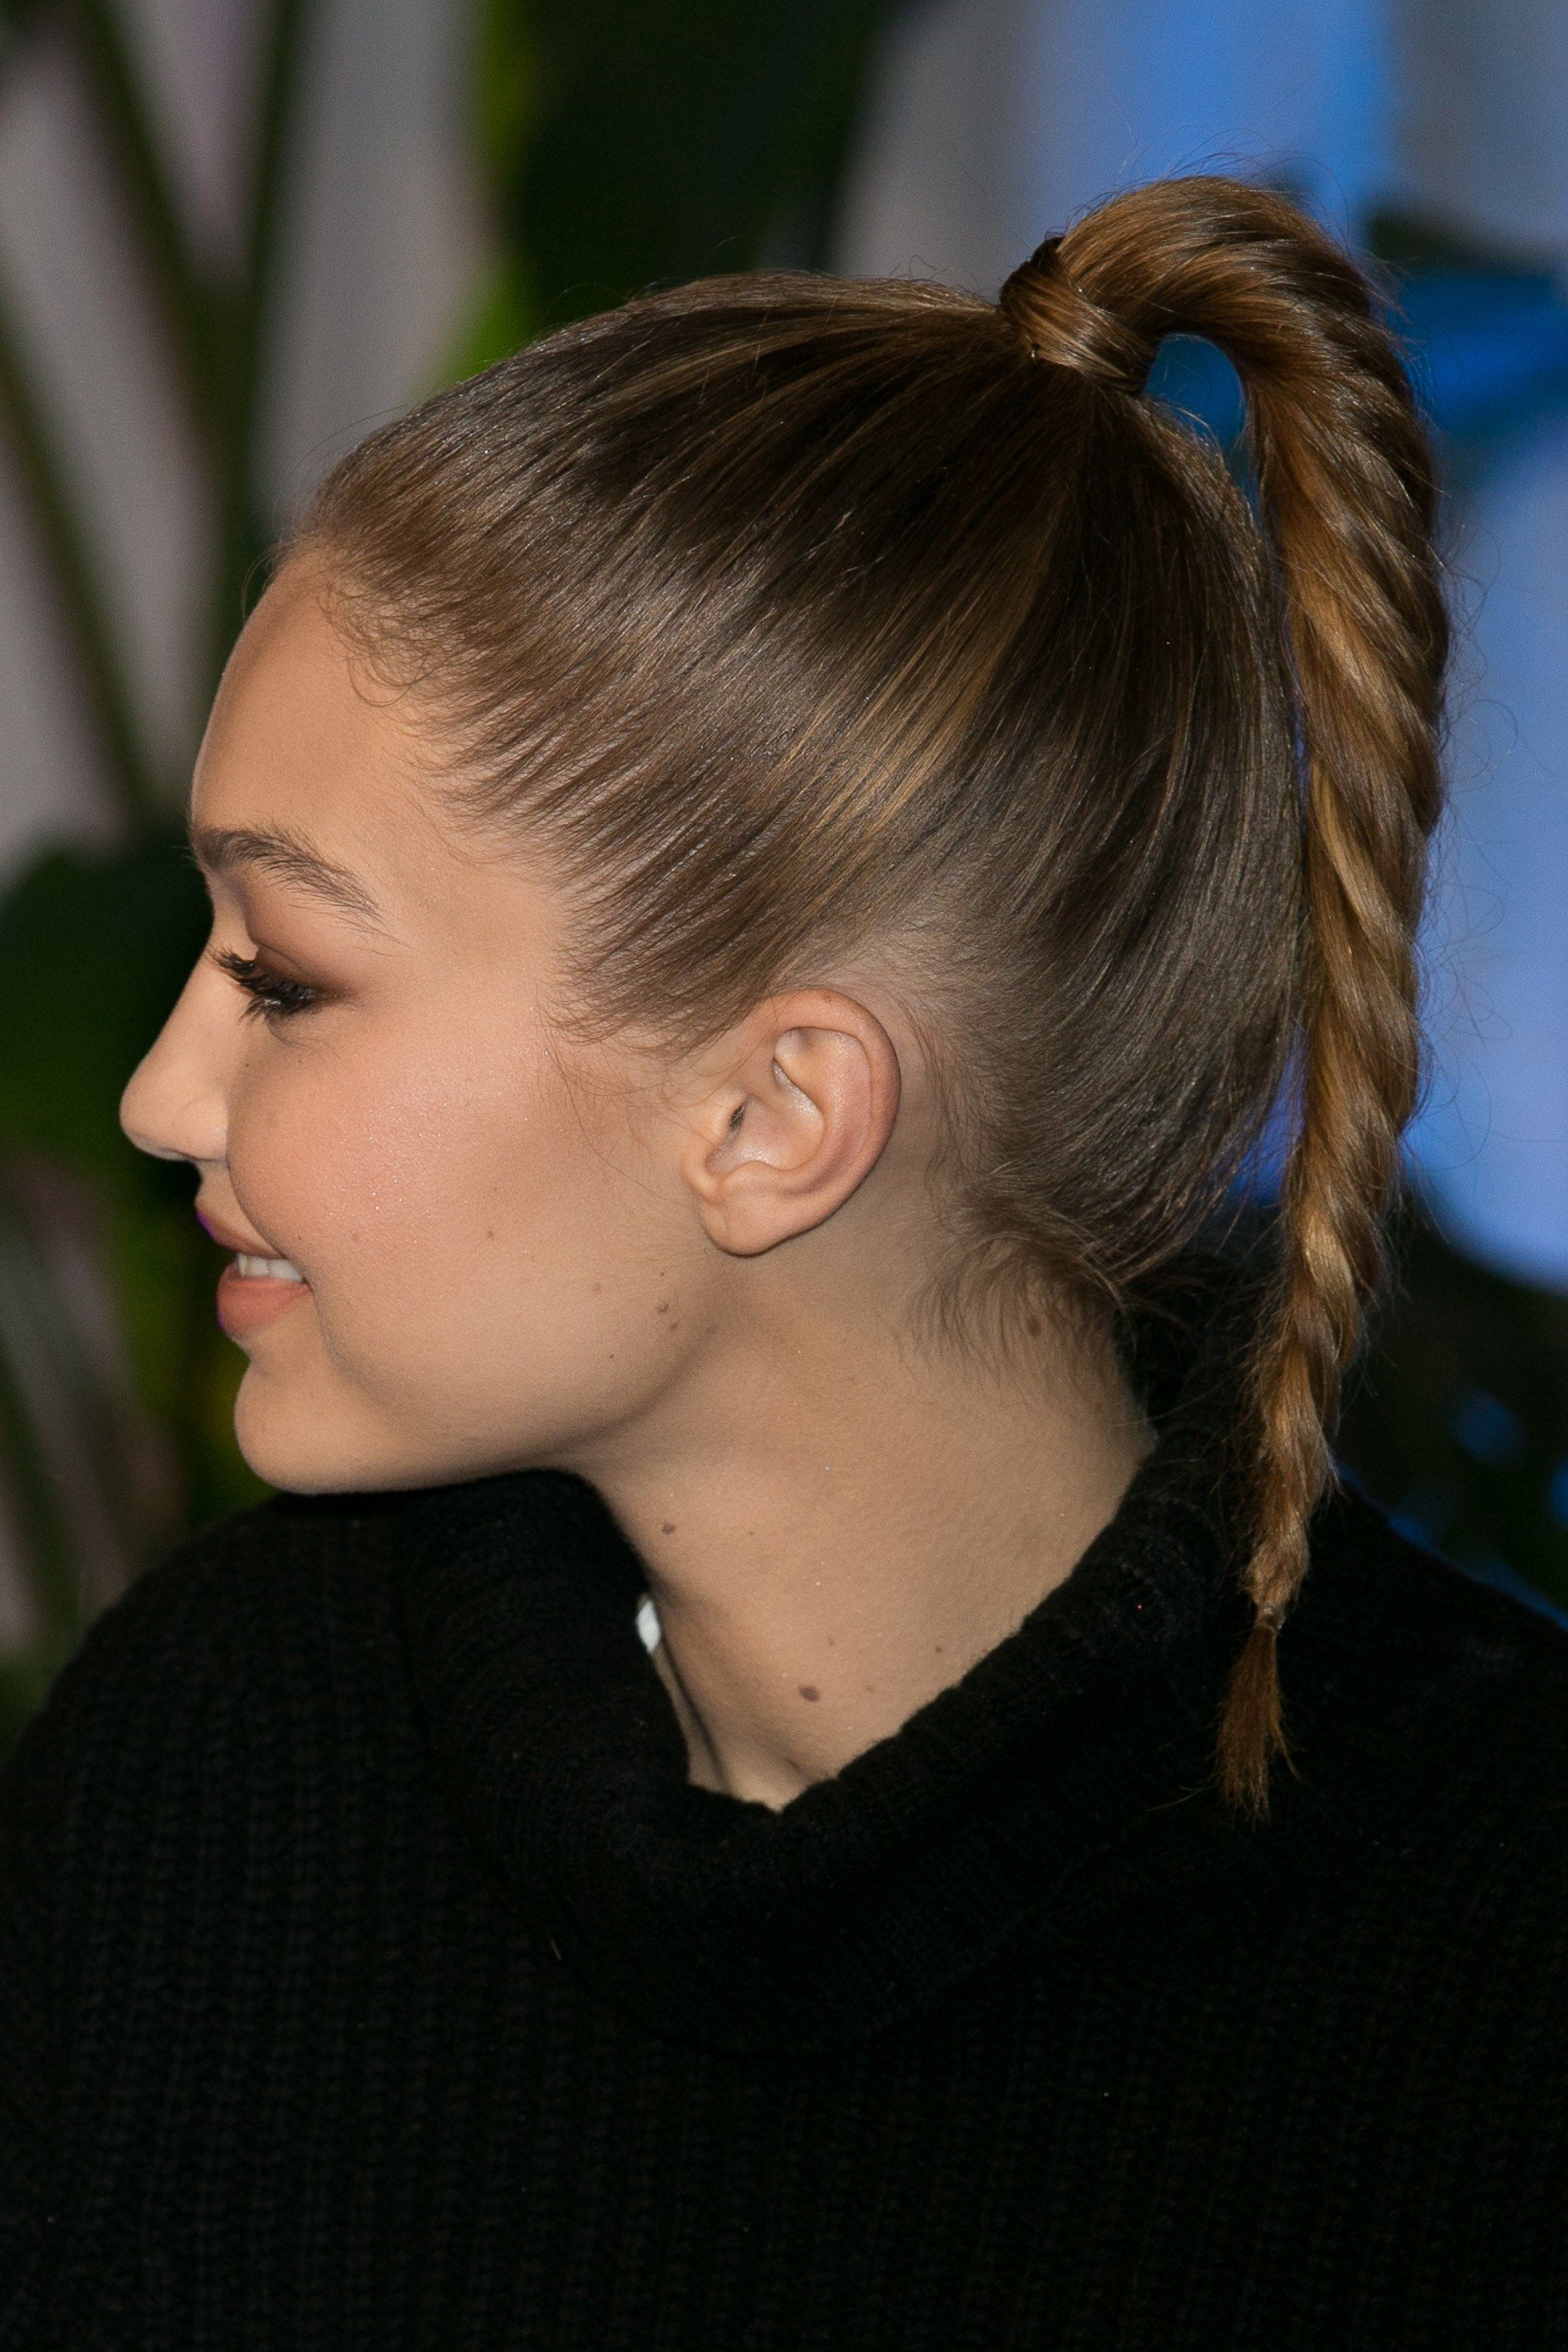 Celebrity Inspiration: Braided Ponytail Hairstyles Inside Most Recent High Ponytail Braided Hairstyles (Gallery 227 of 292)